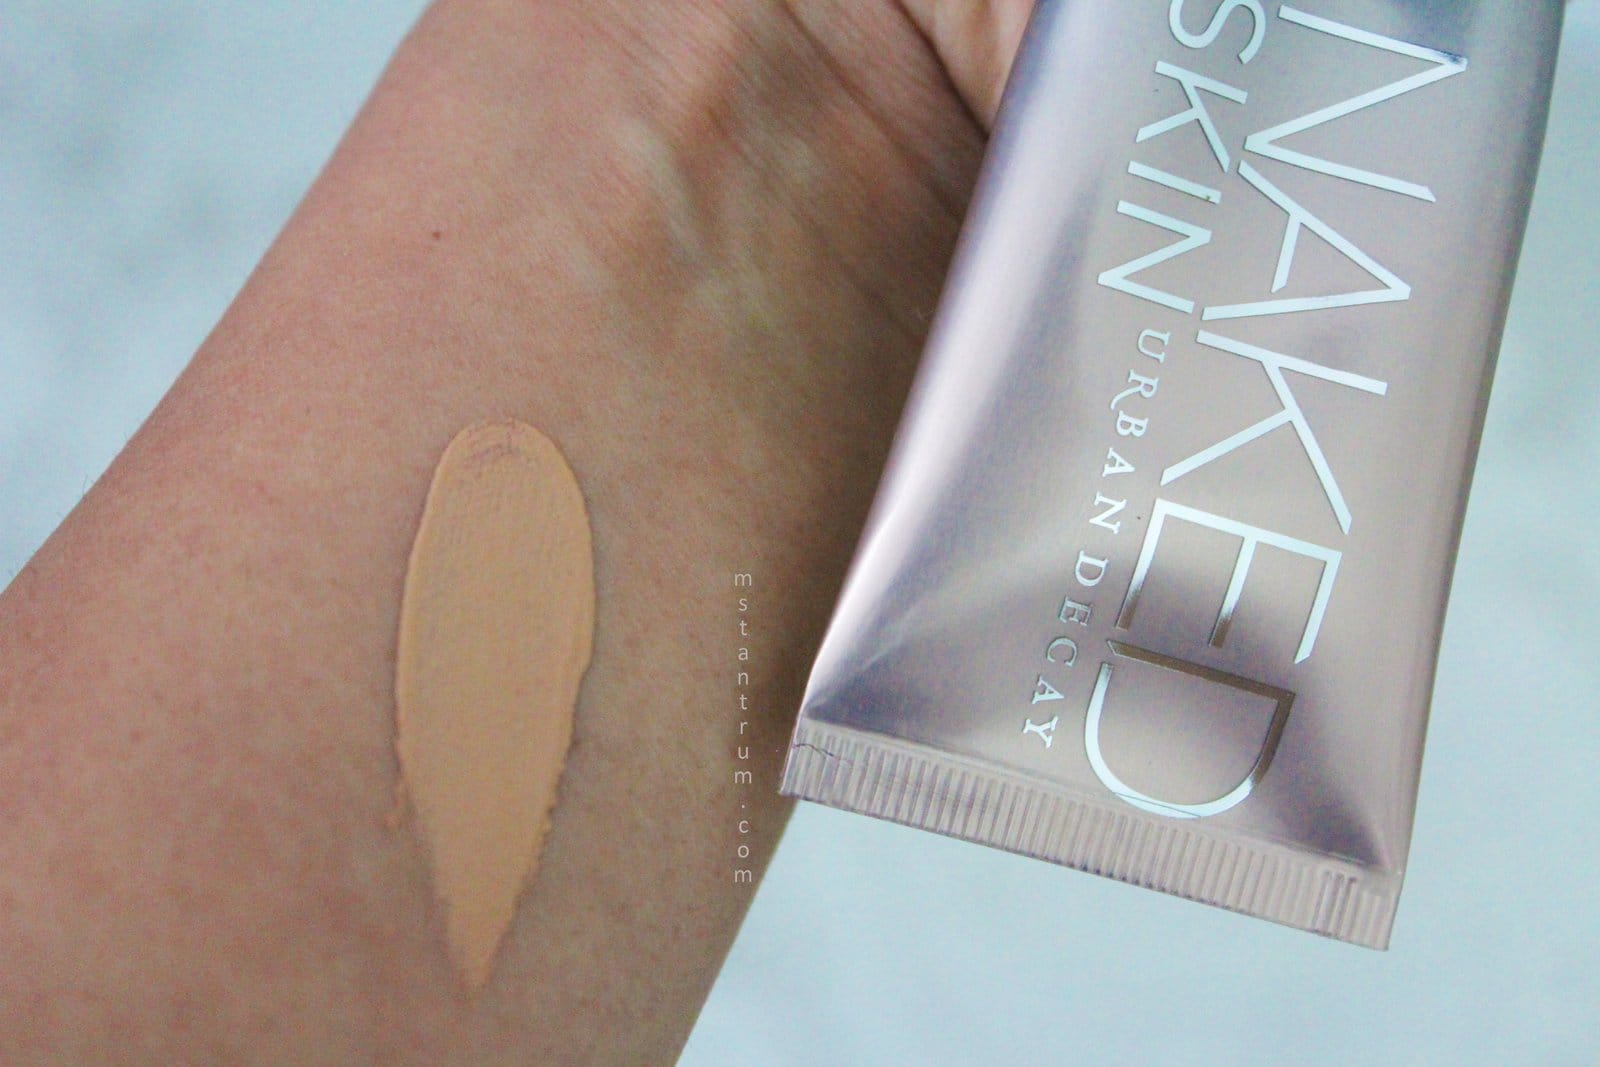 Urban Decay Naked Skin One & Done Hybrid complexion perfector